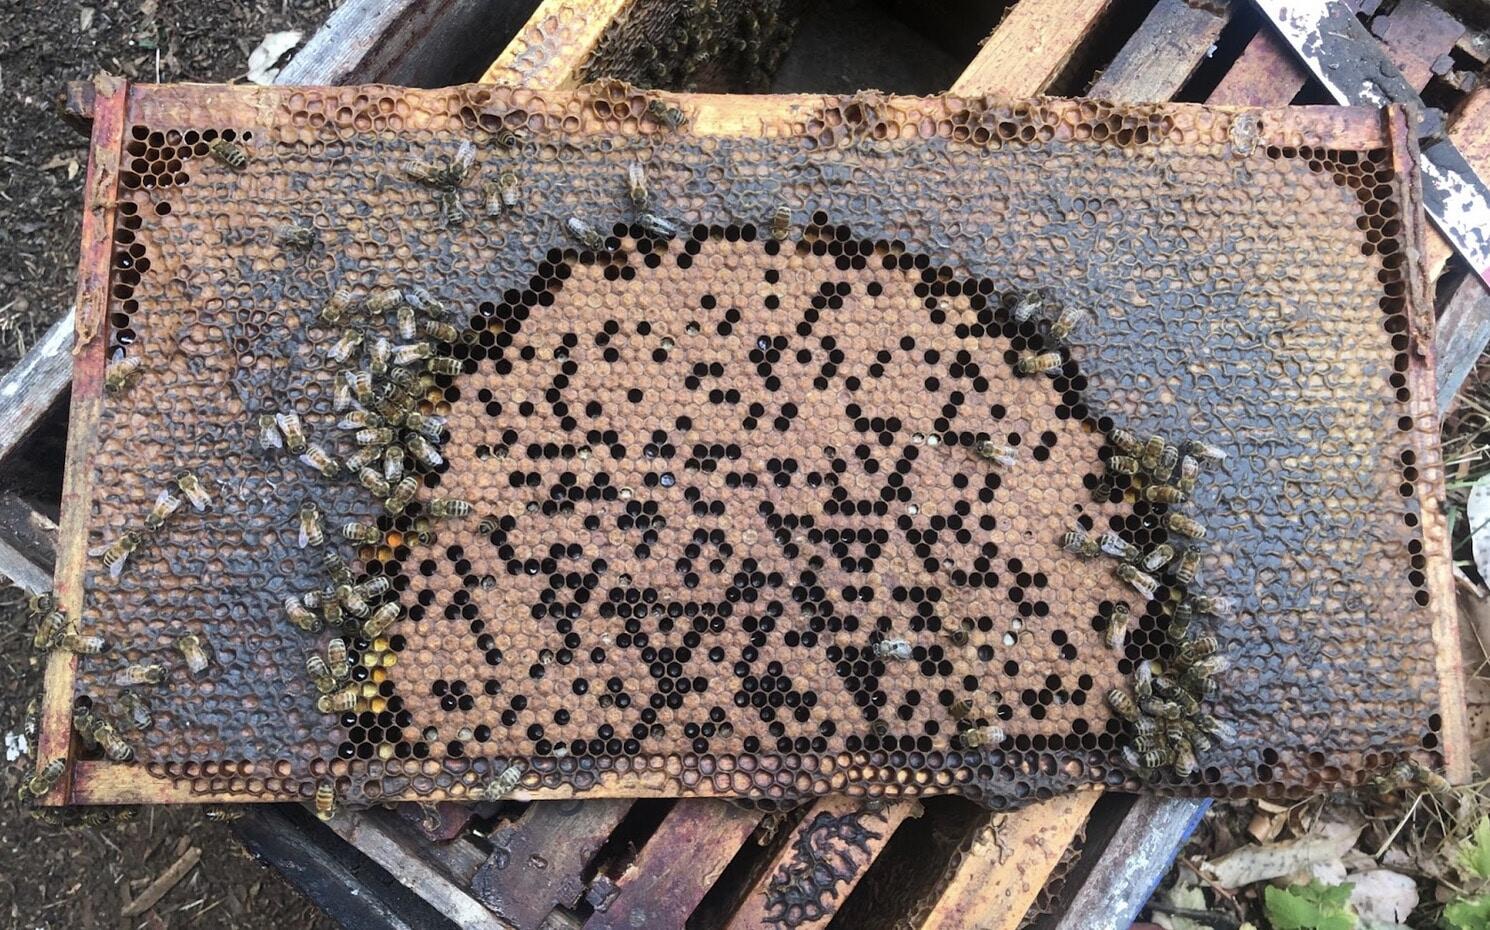 Bees in nest